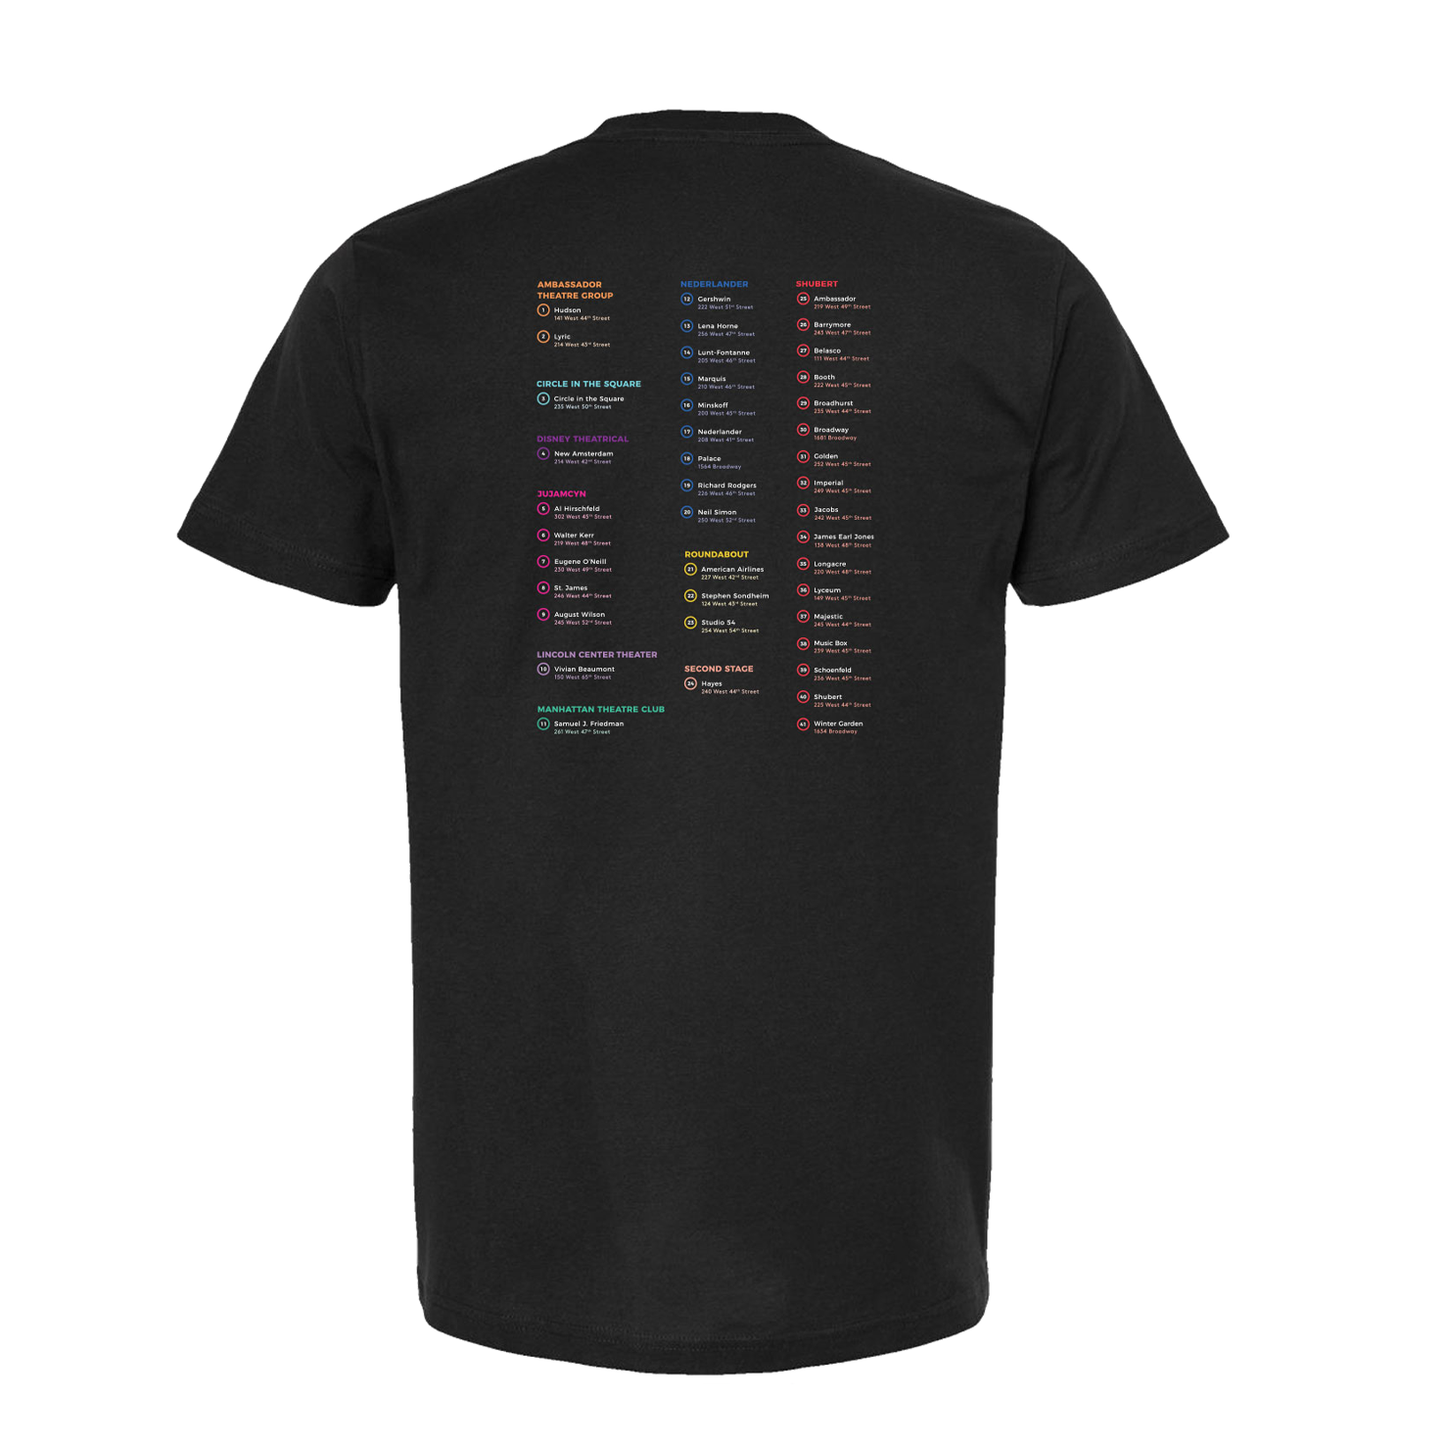 MUSEUM OF BROADWAY Broadway Map Tee – Museum Of Broadway by Creative Goods